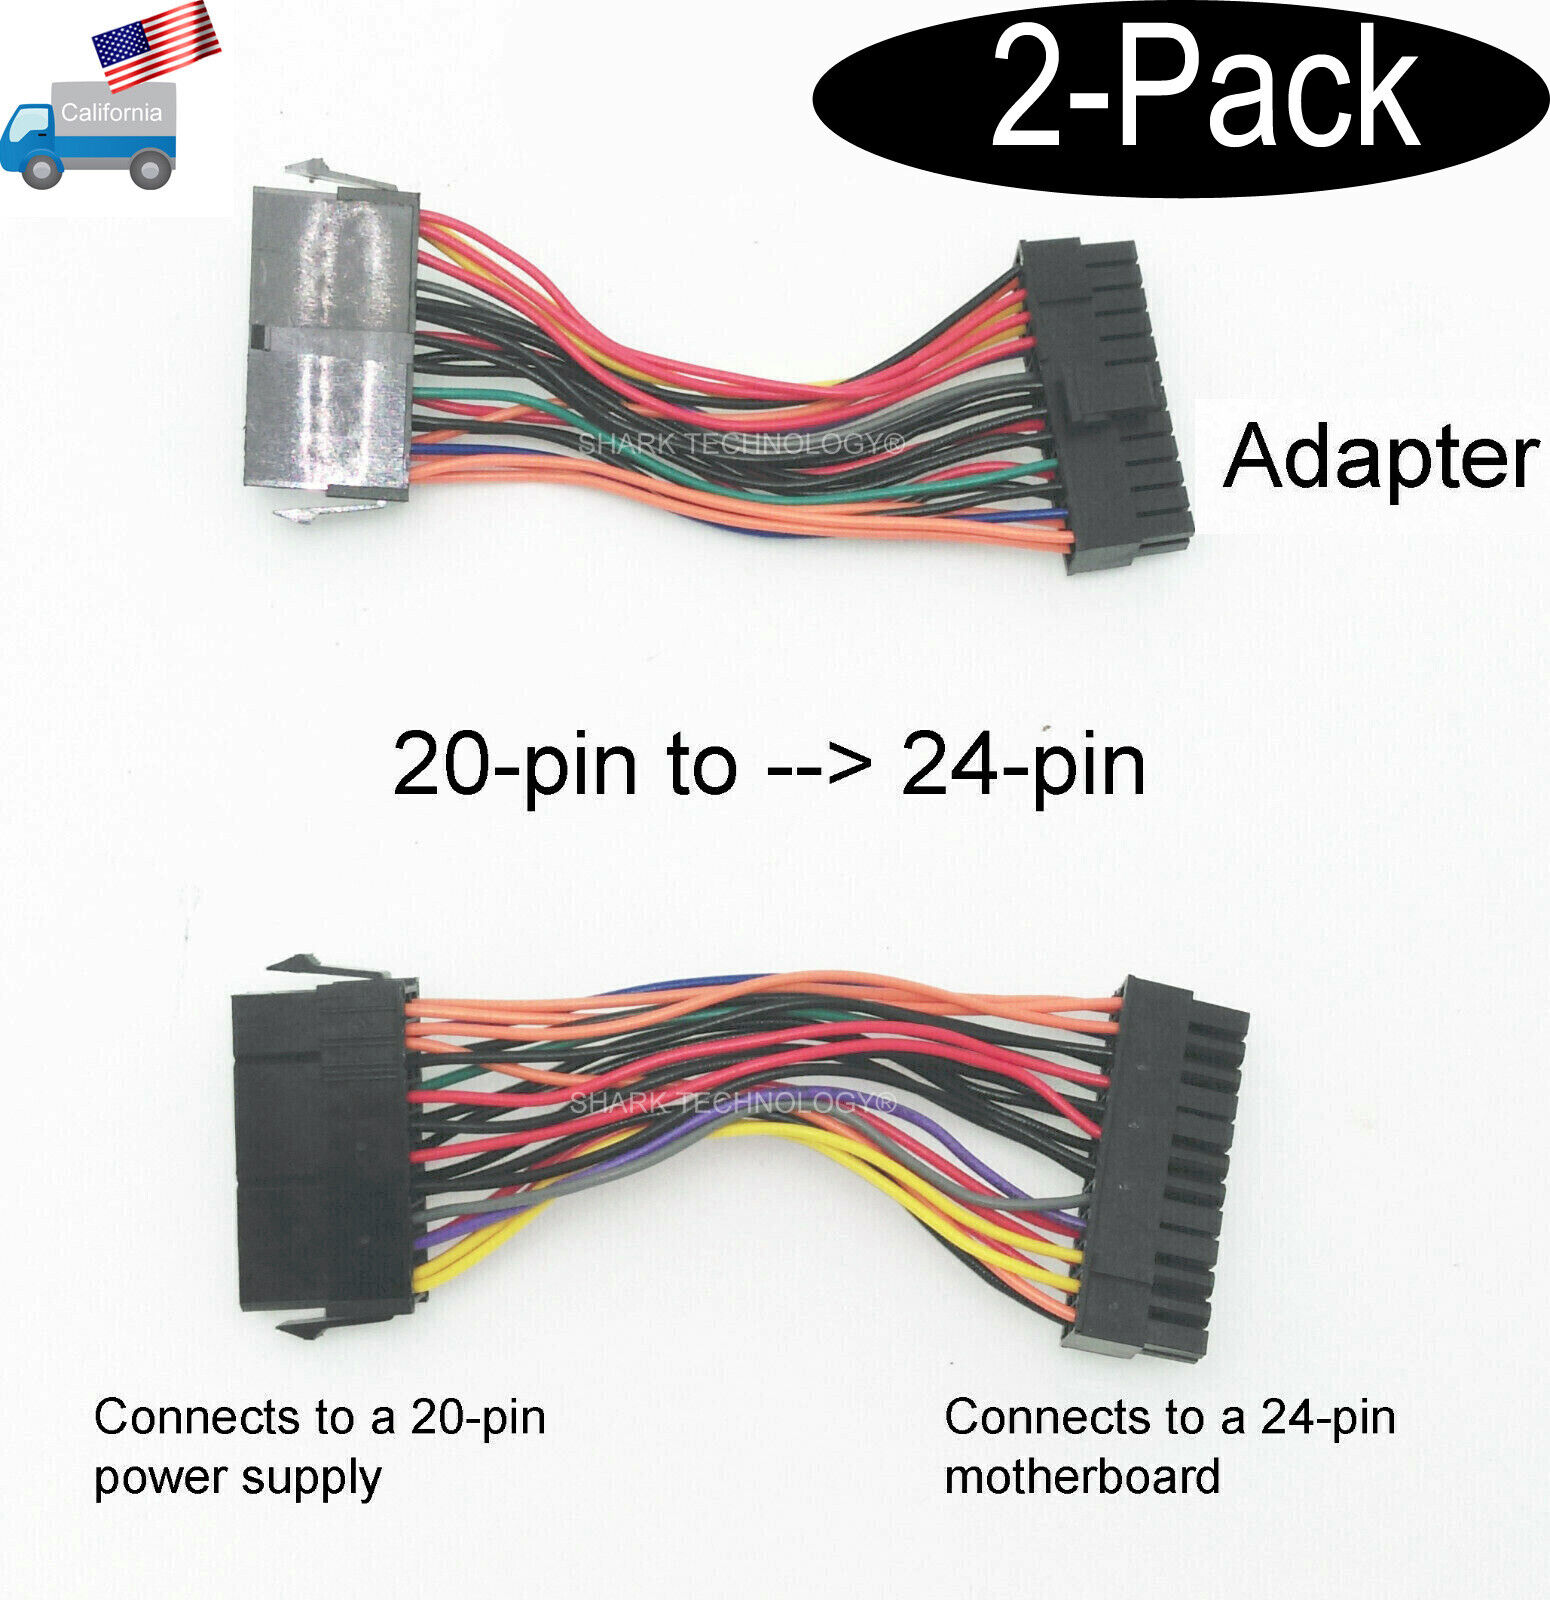 2-Pack: New 20pin Legacy ATX Power Supply to 24pin PC Motherboard Adapter Cable